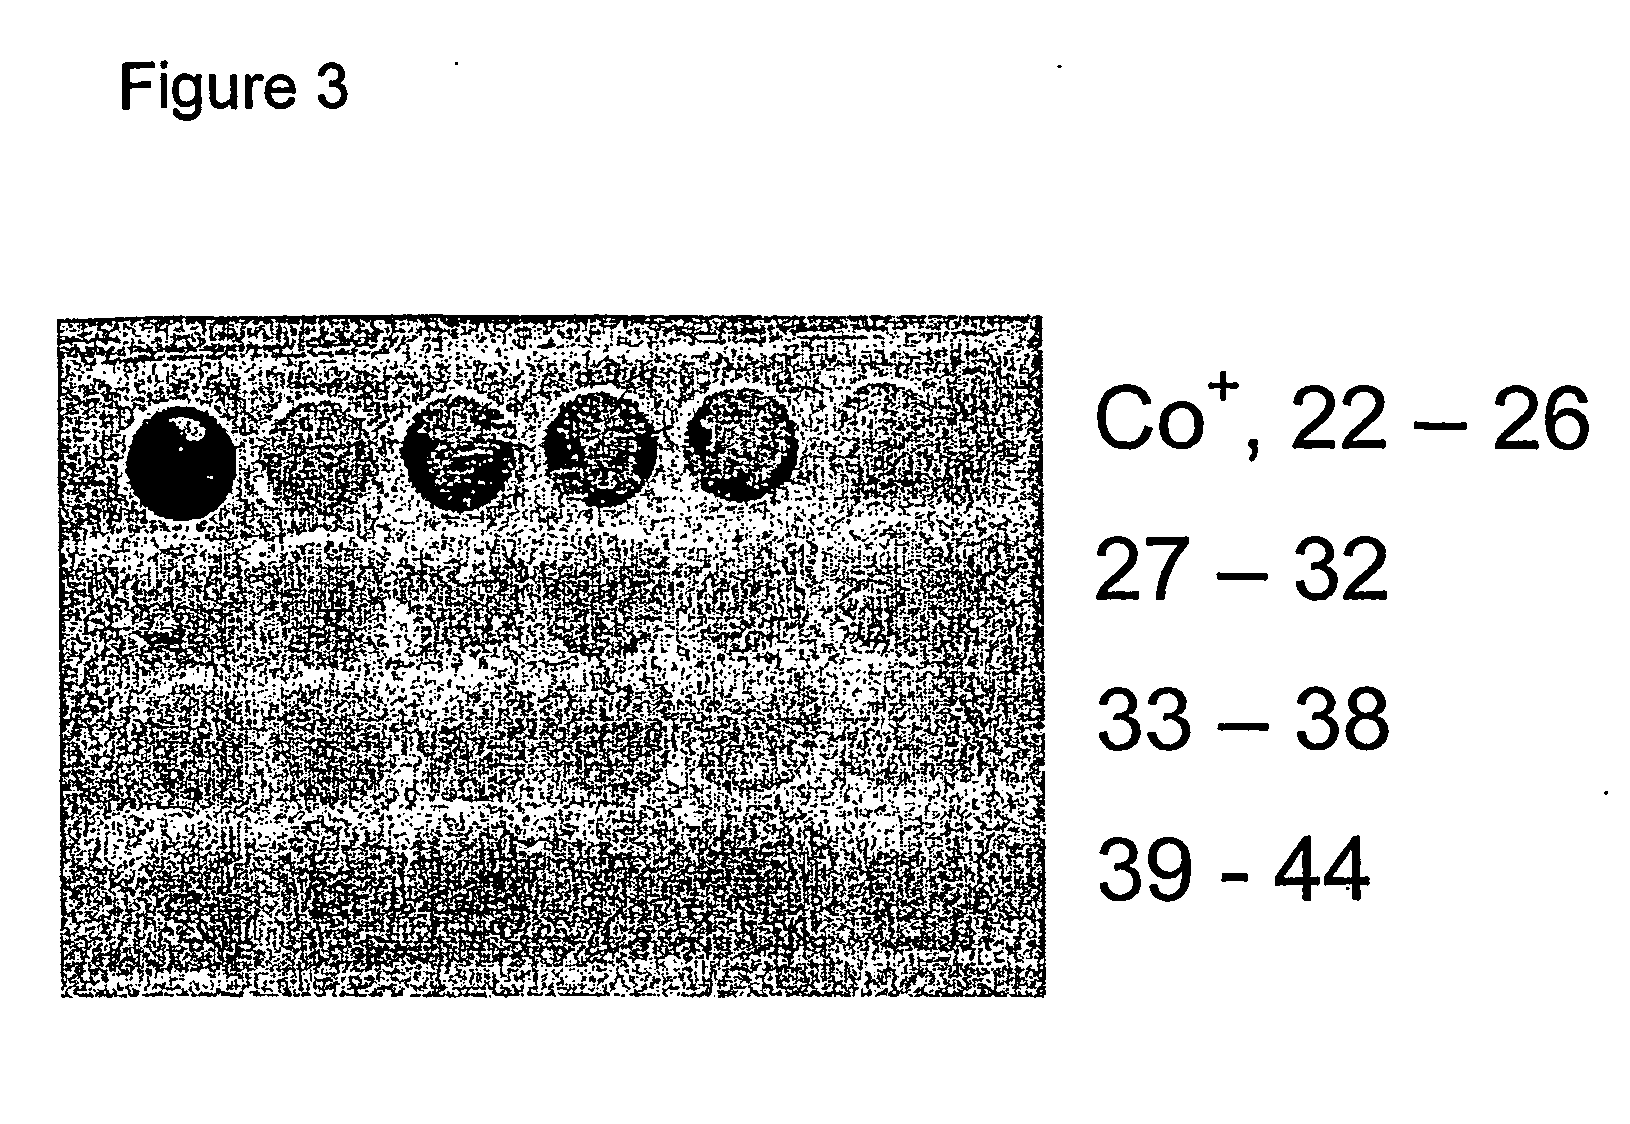 Follicular fluid for prolonged growth and survival of cells for cell therapies